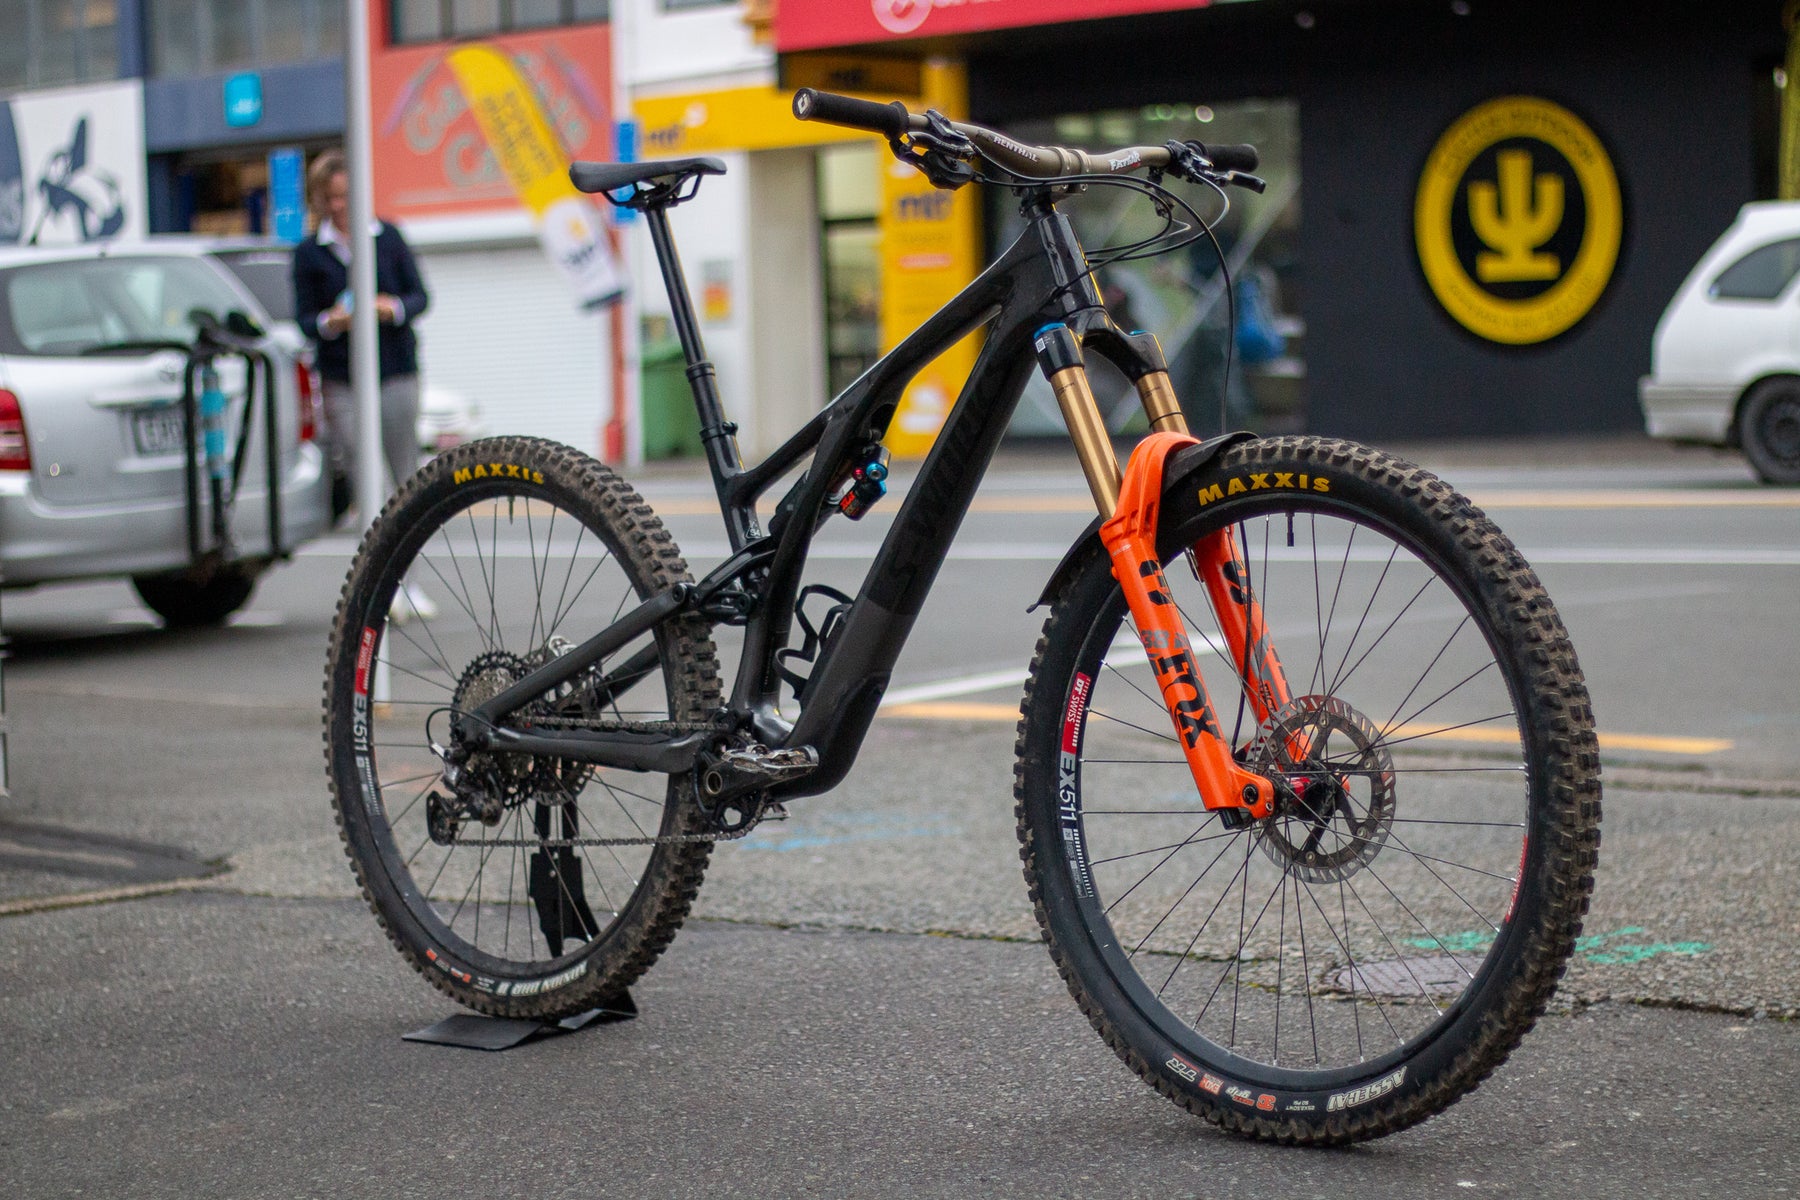 Specialized Stumpjumper Evo Short Term Review